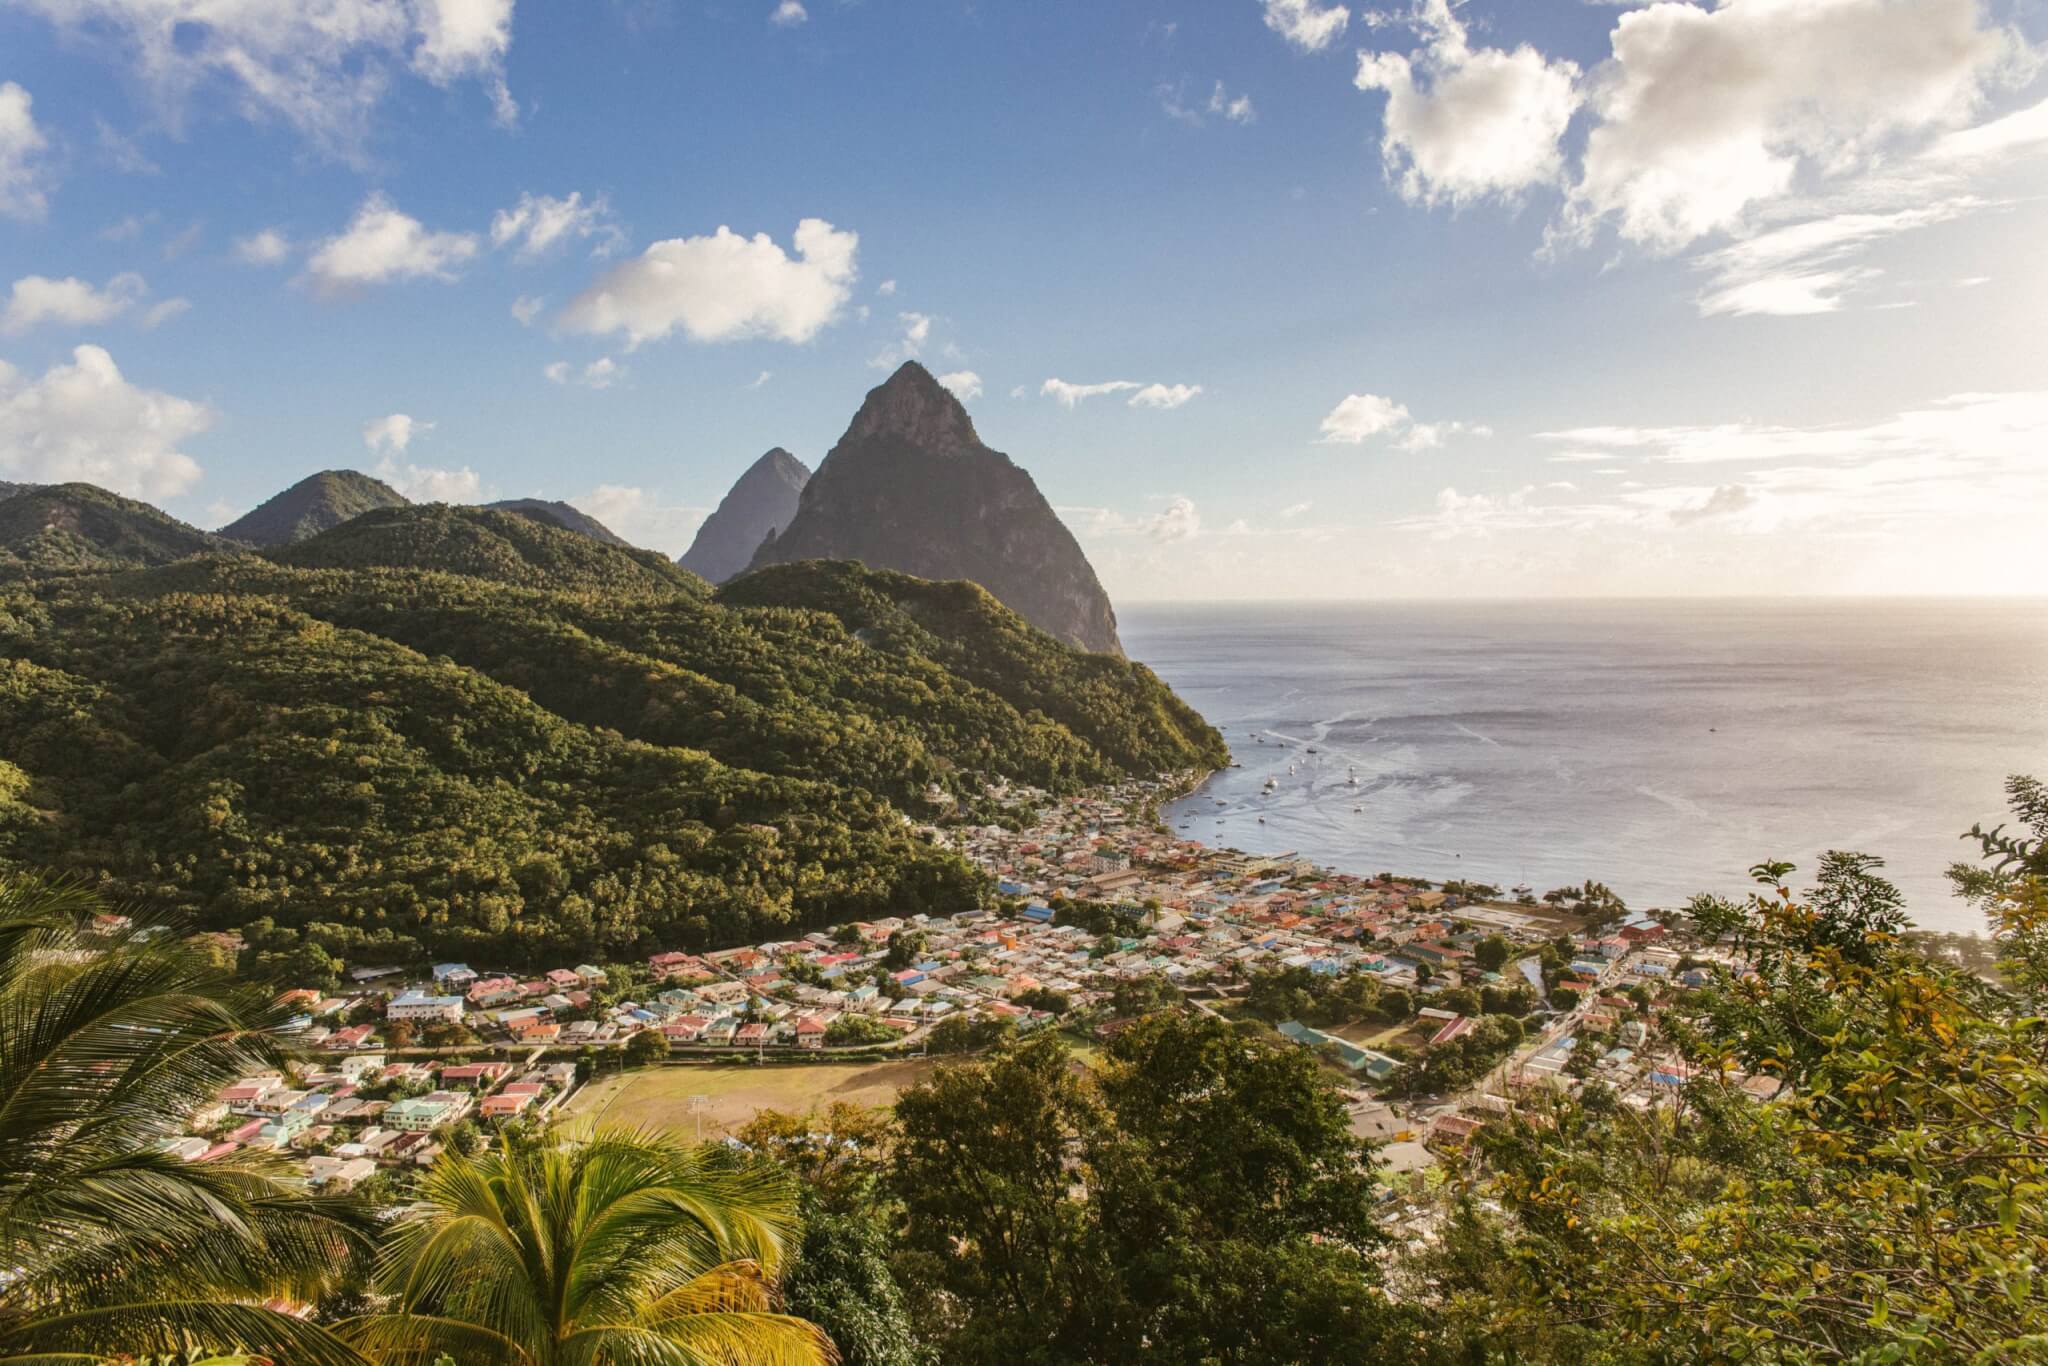 St. Lucia is one of the best places to honeymoon, according to experts.